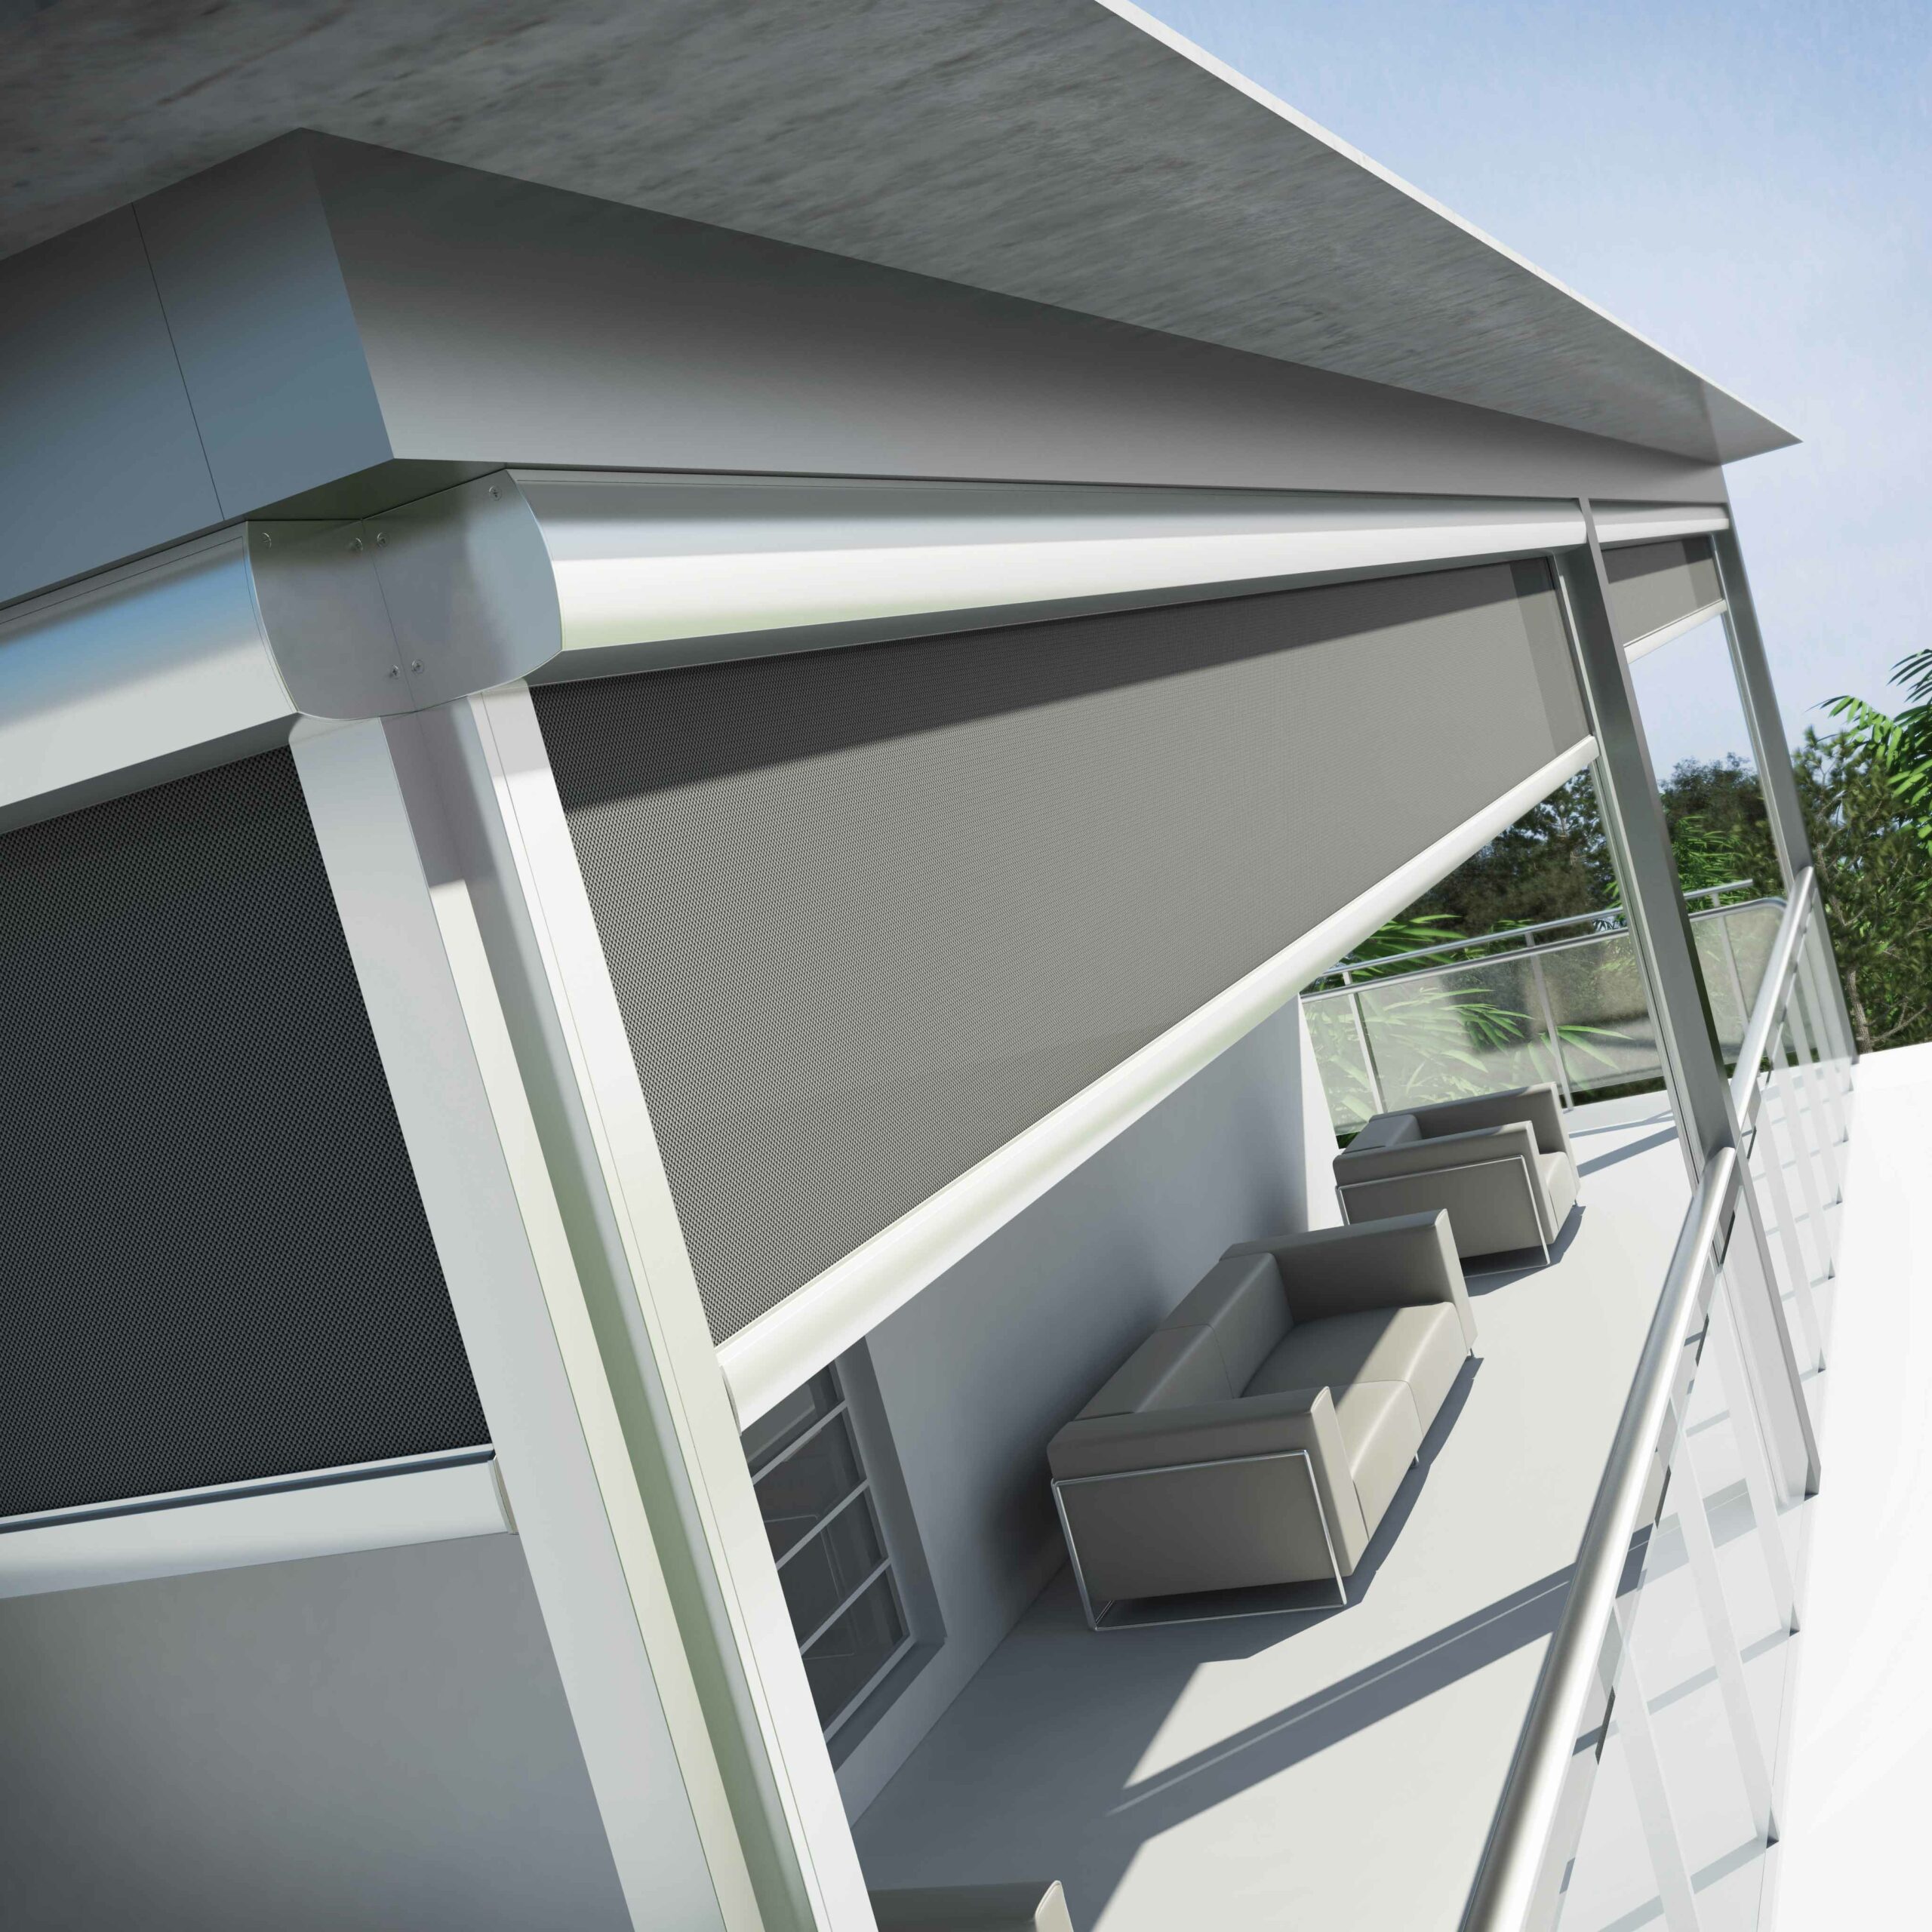 VERTICAL OUTDOOR AWNING